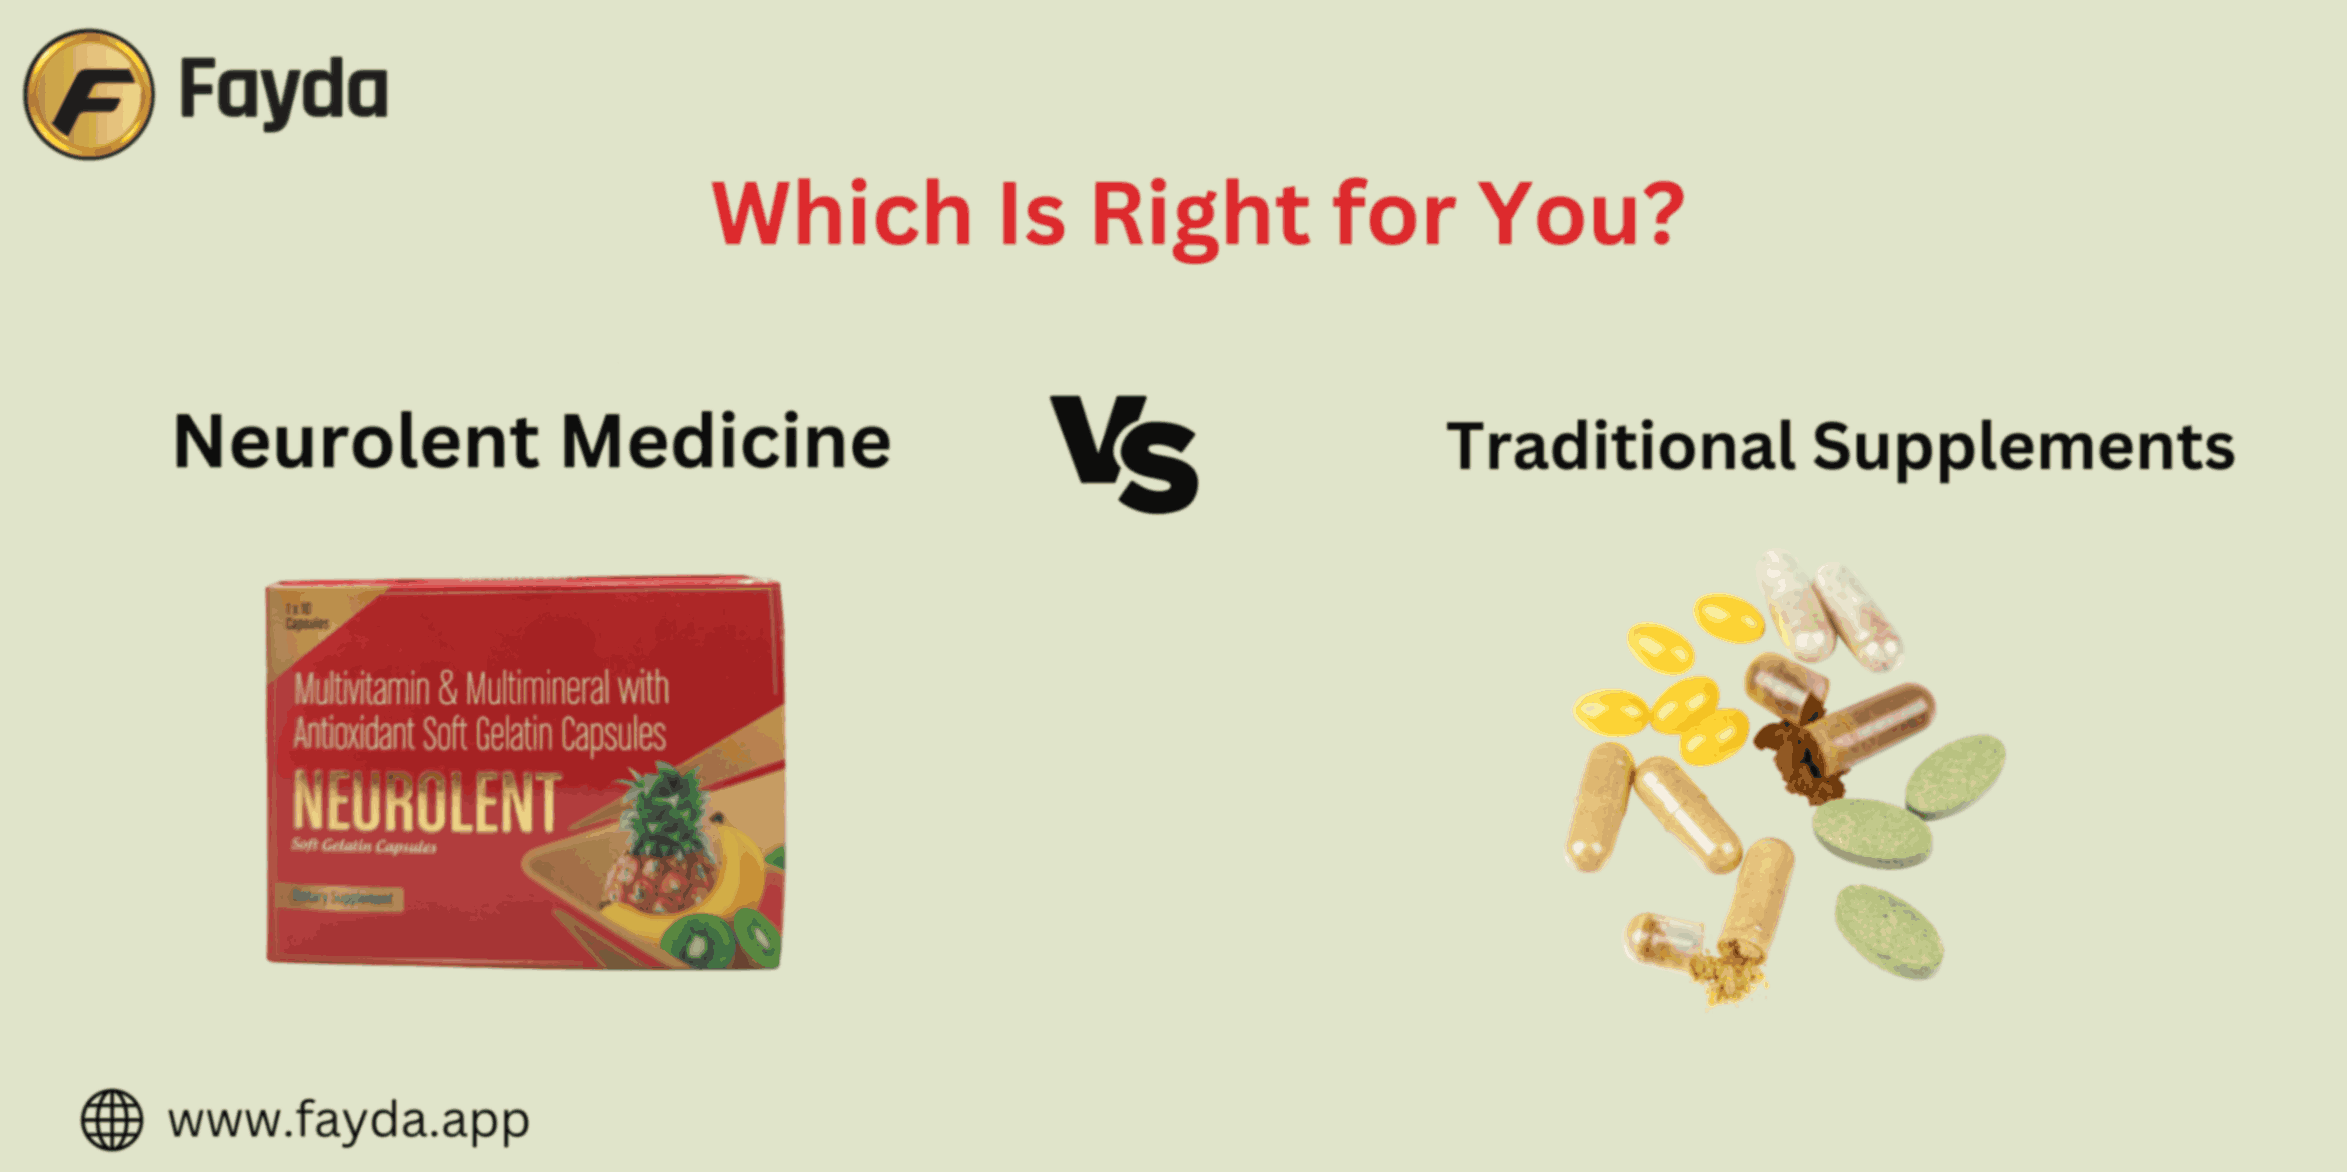 Neurolent Medicine vs. Traditional Supplements: Which Is Right for You?